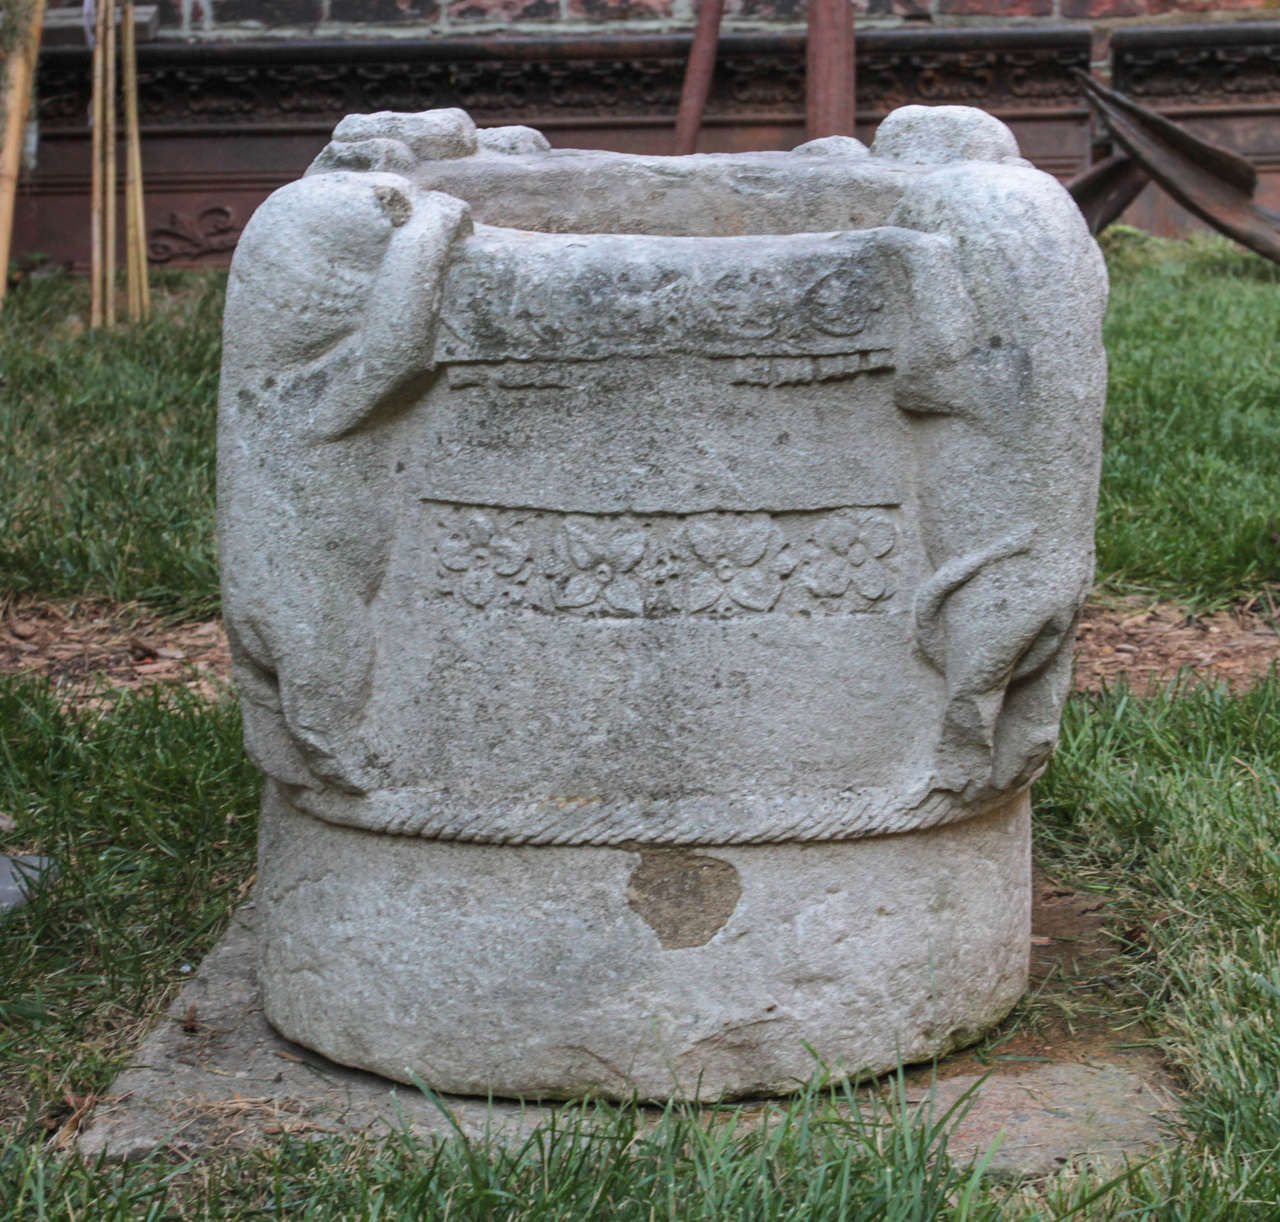 Extremely rare and unique carved stone vessel with four creatures attempting to climb inside at each corner.